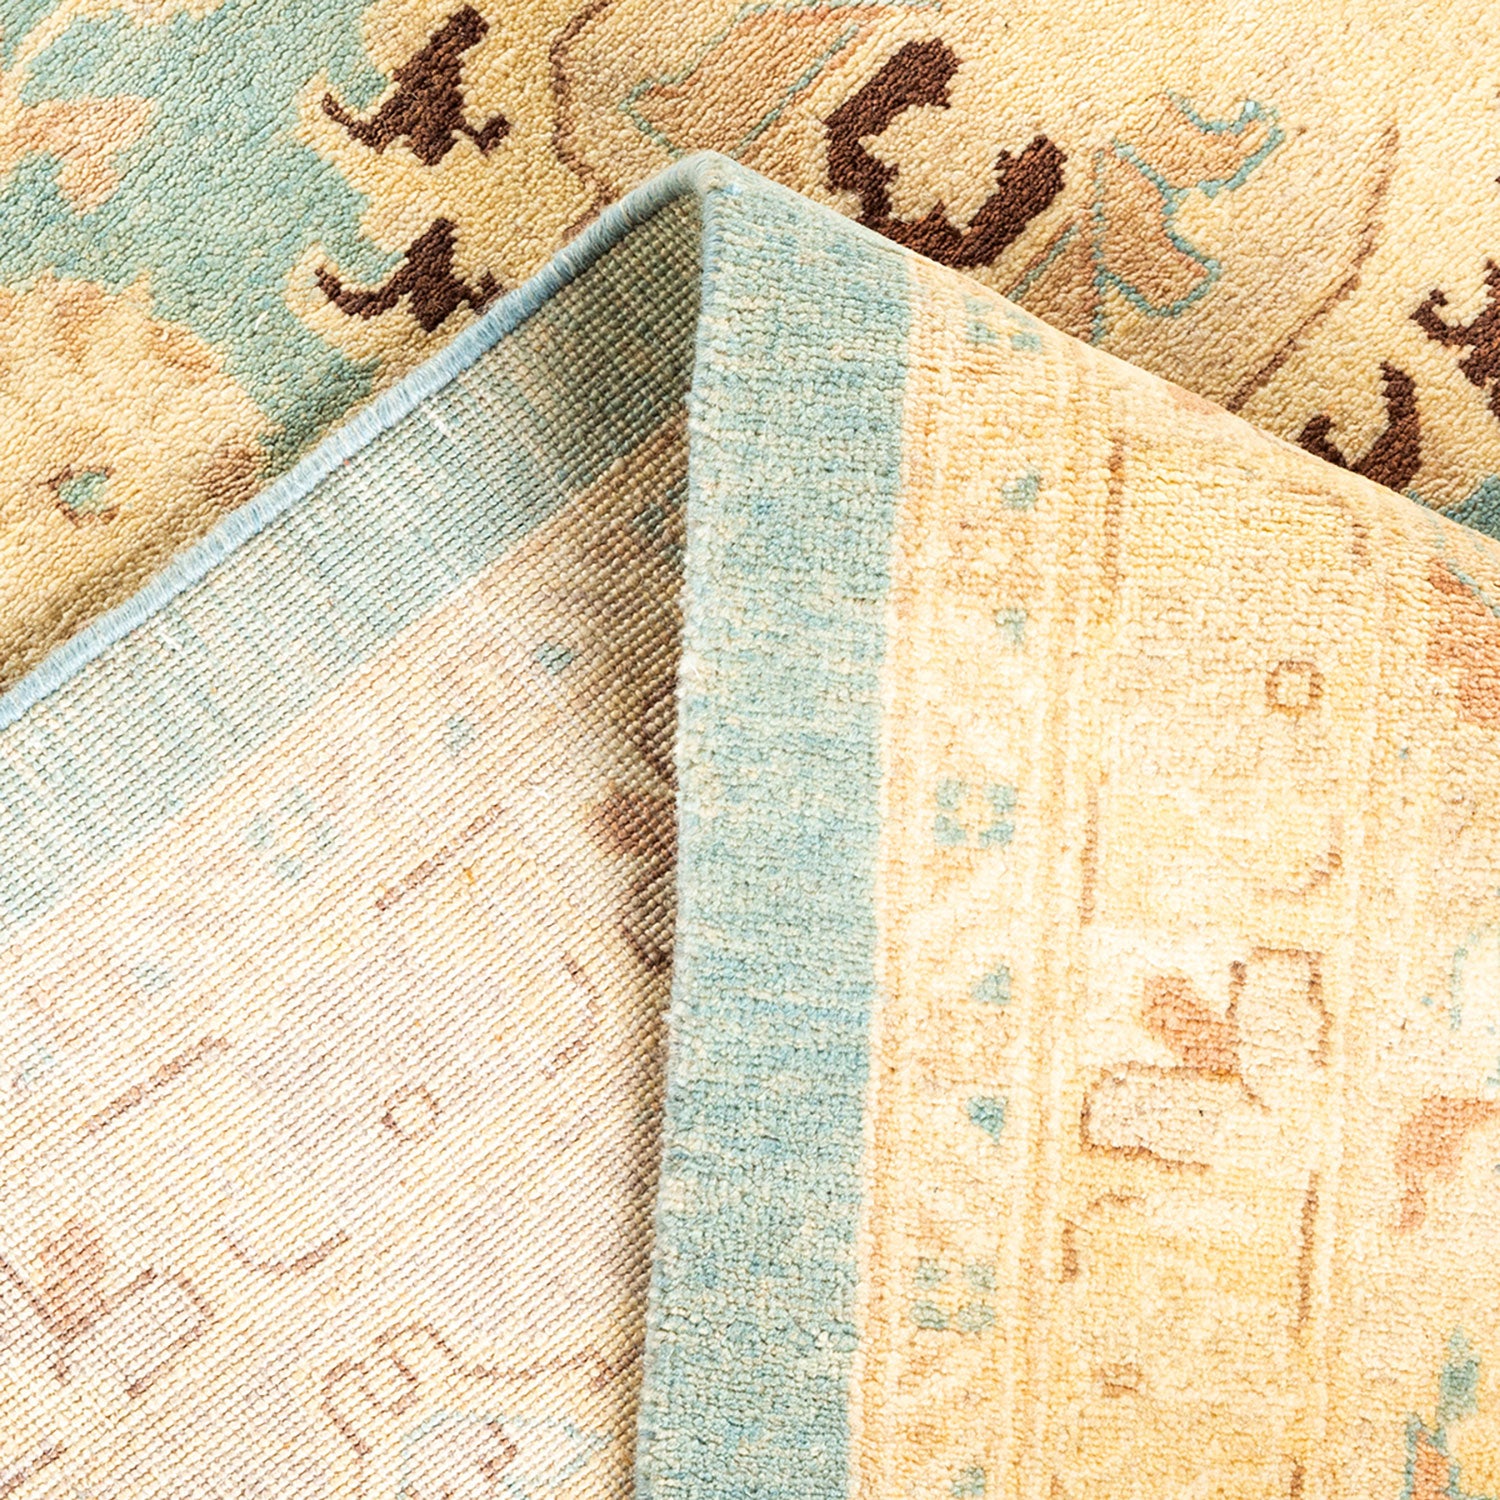 Close-up view of two overlapping carpets with contrasting designs.